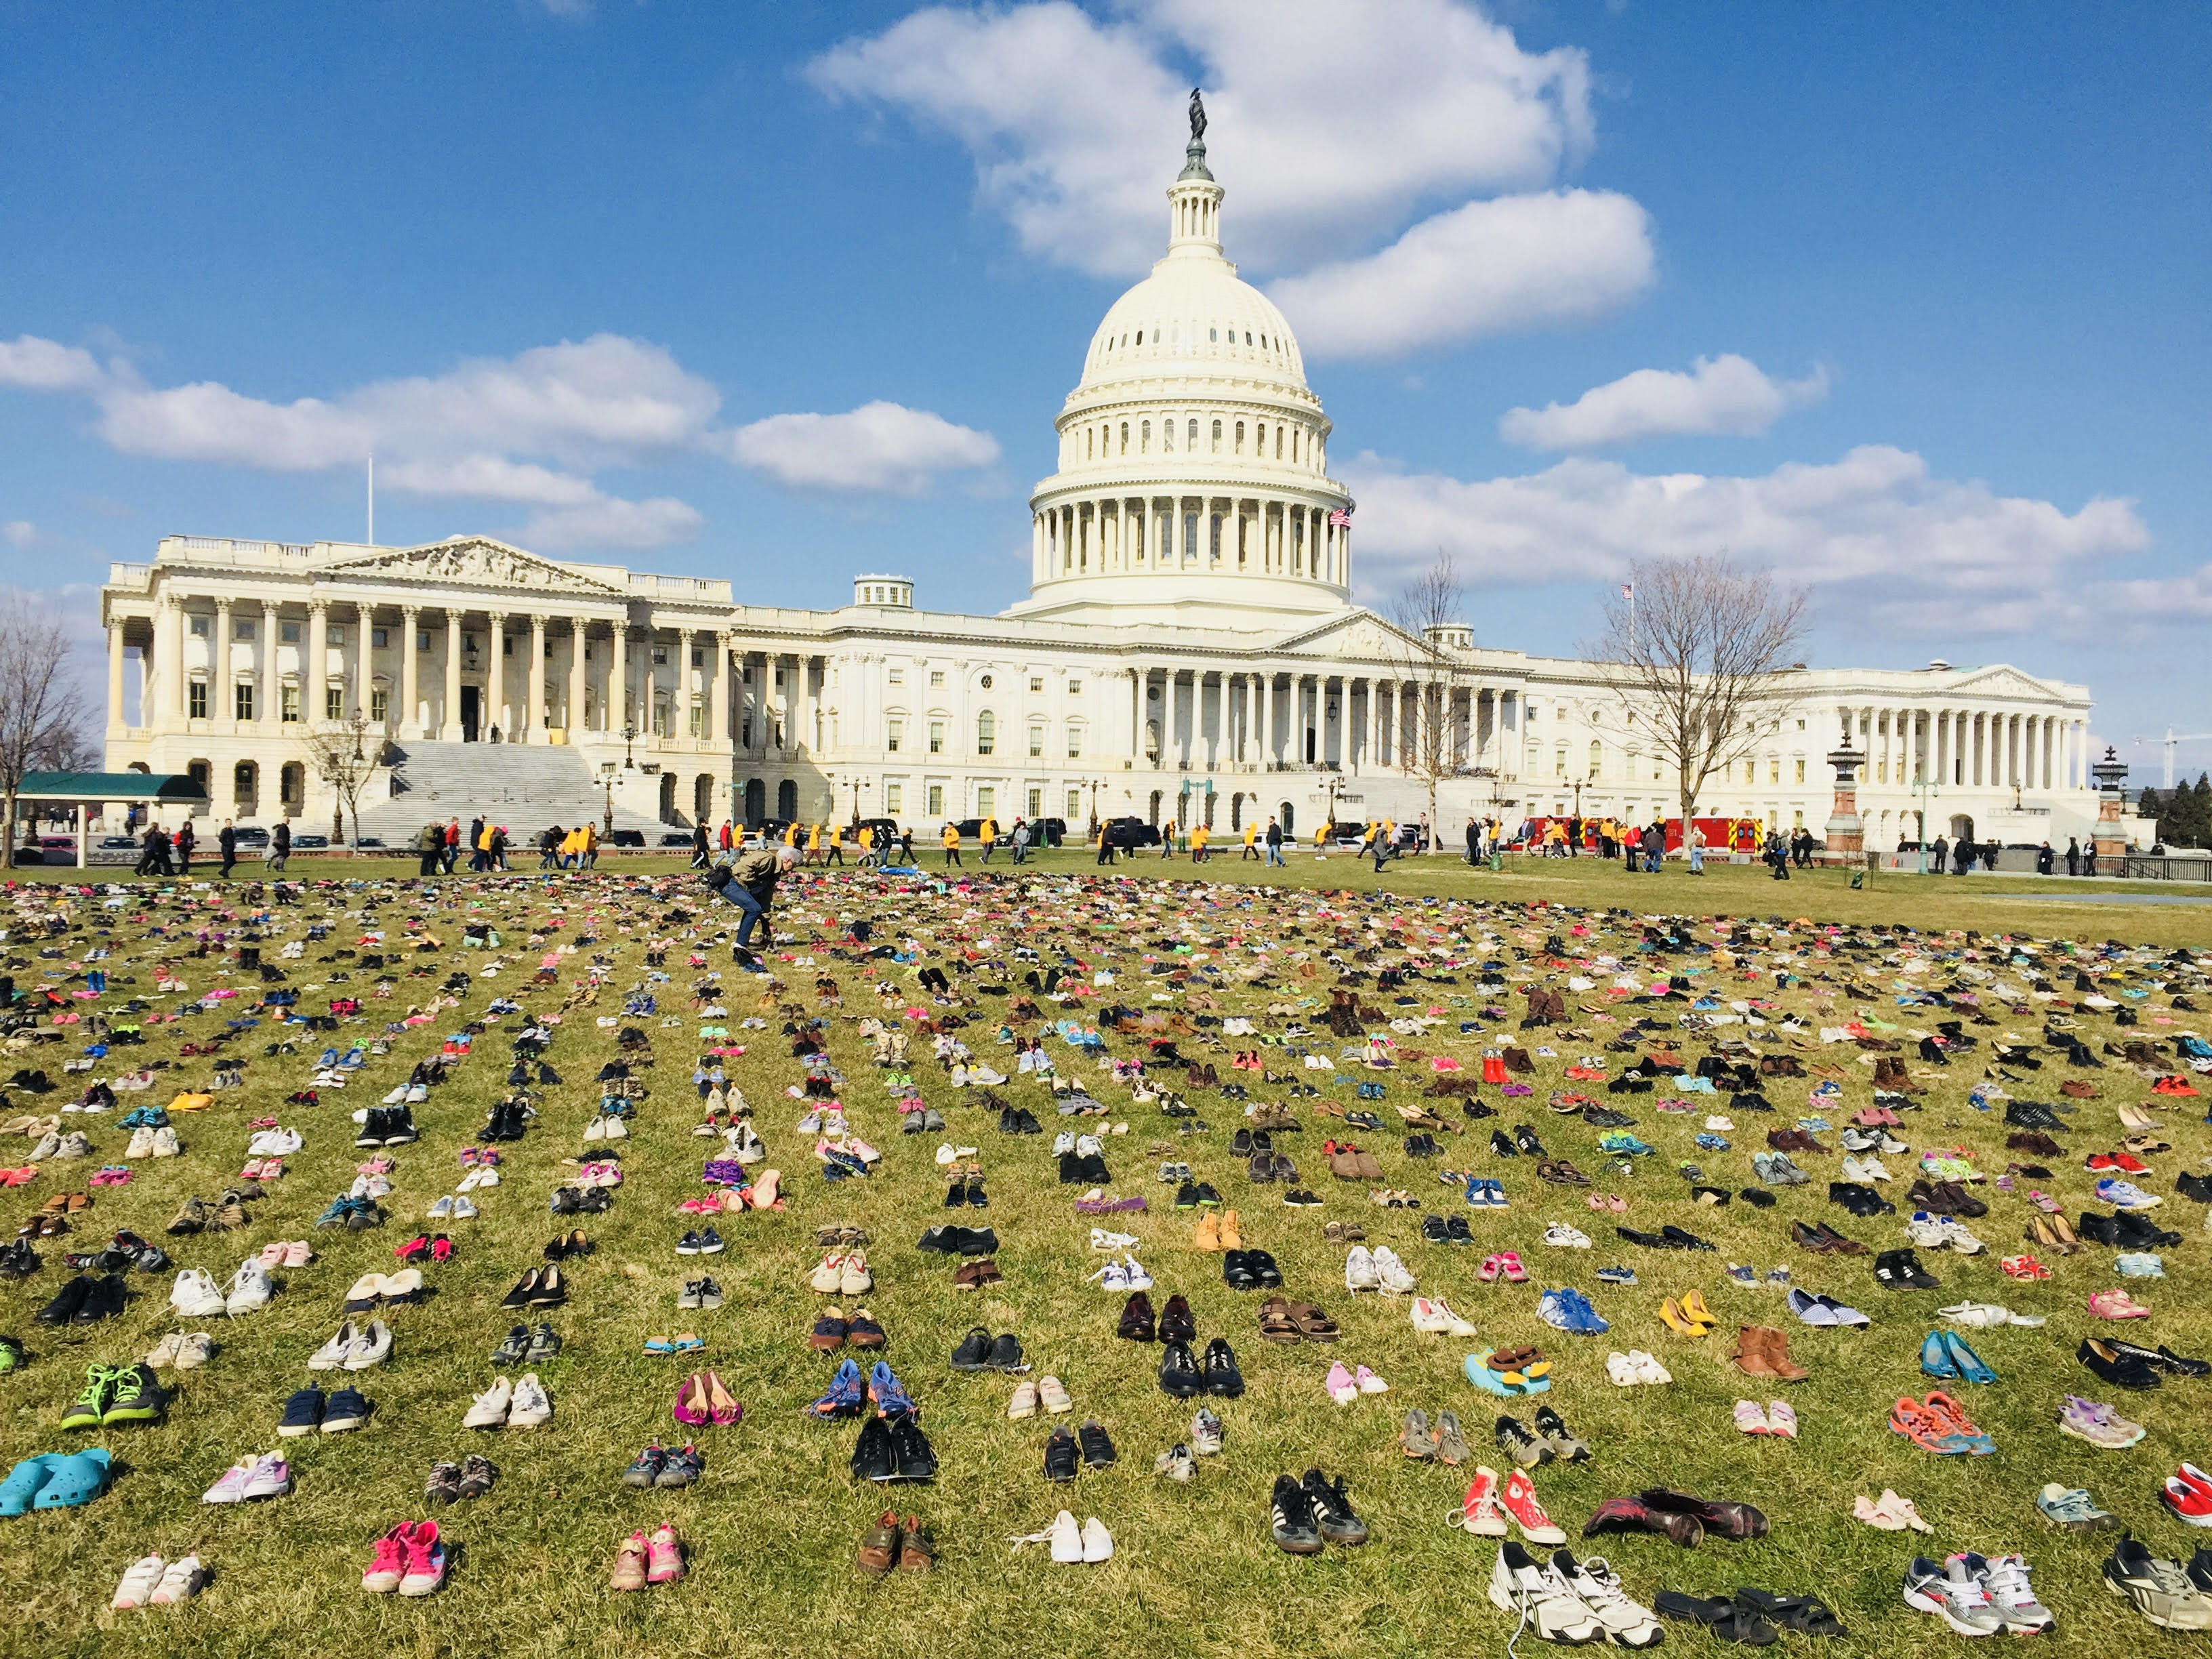 A pair of shoes for every child killed by gun violence since Sandy Hook